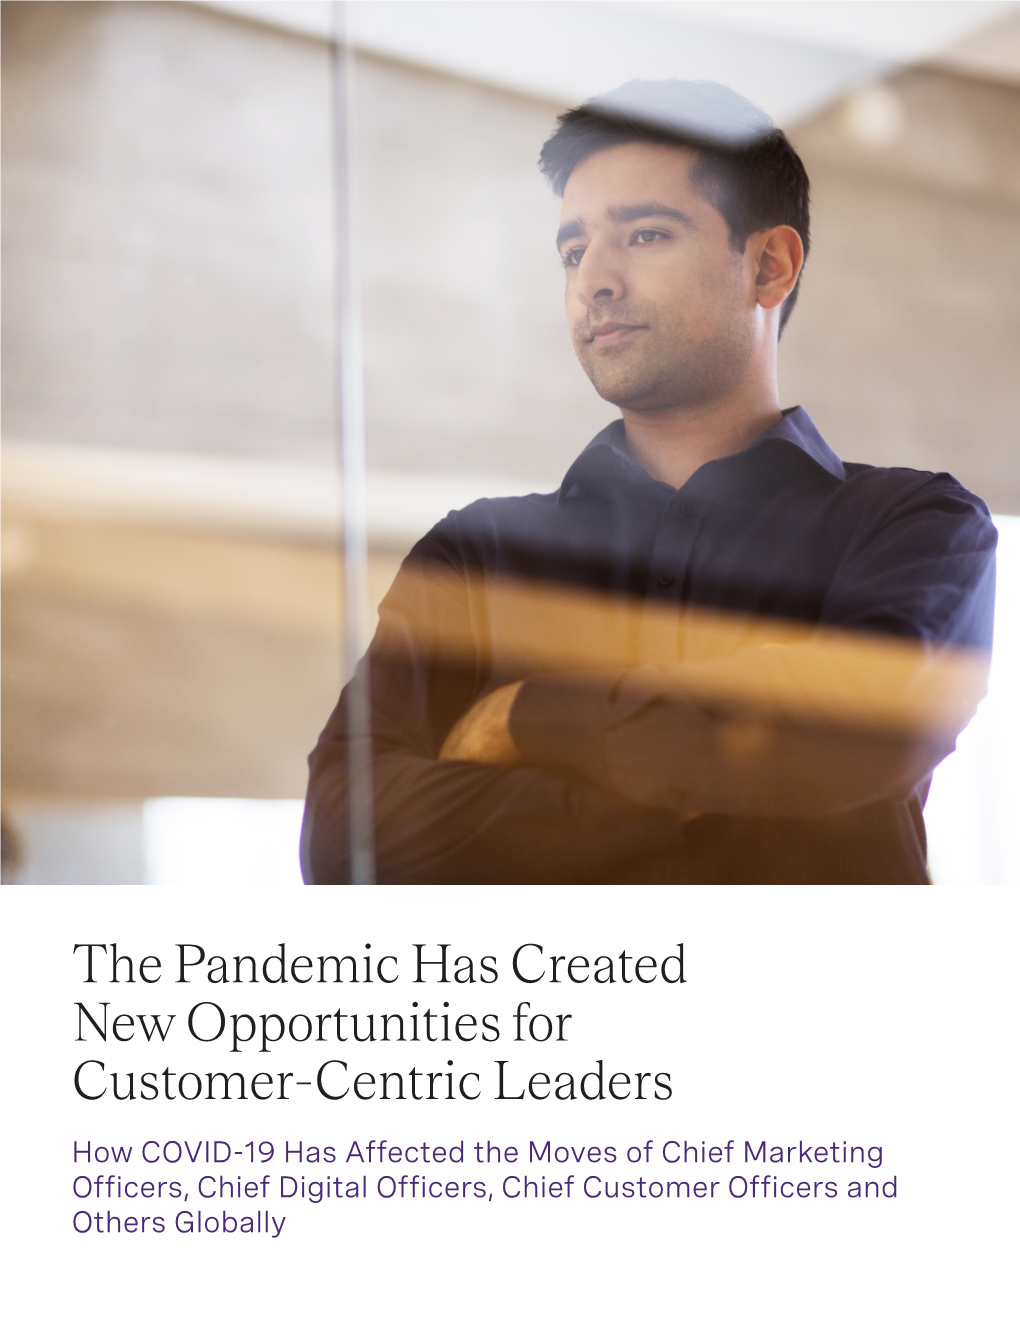 The Pandemic Has Created New Opportunities for Customer-Centric